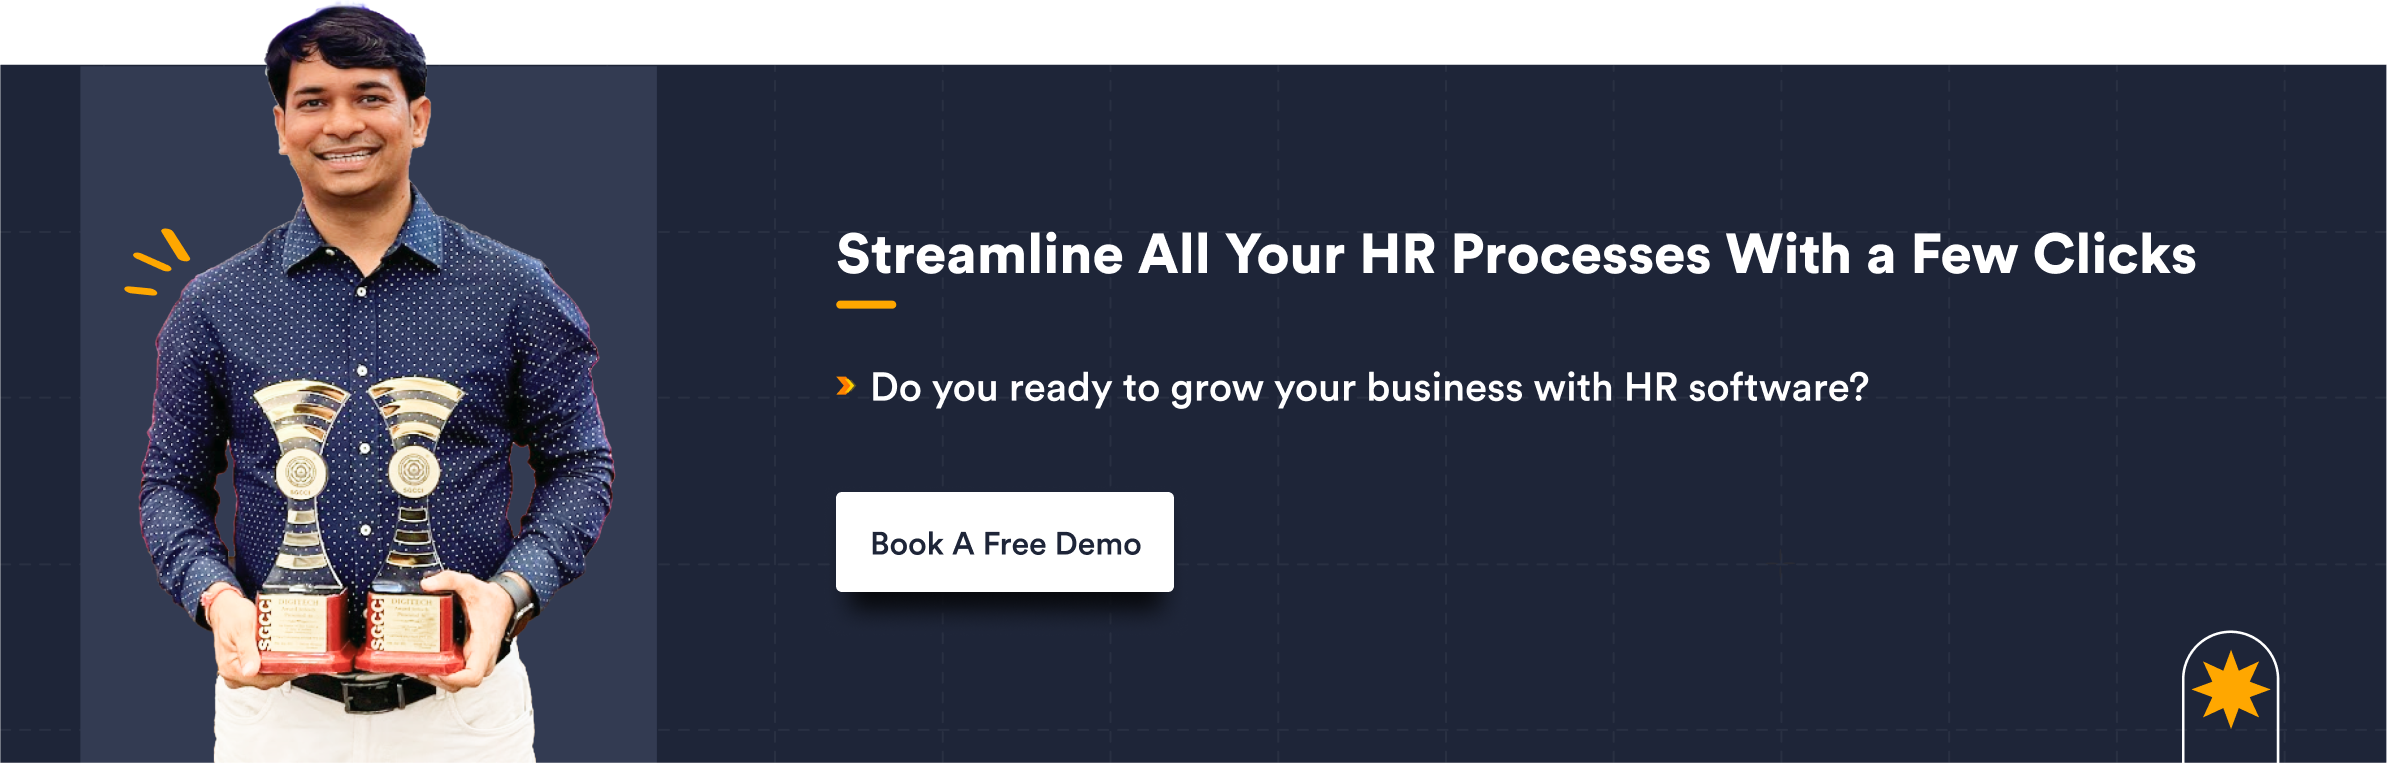 Streamline All Your HR Processes With a Few Clicks